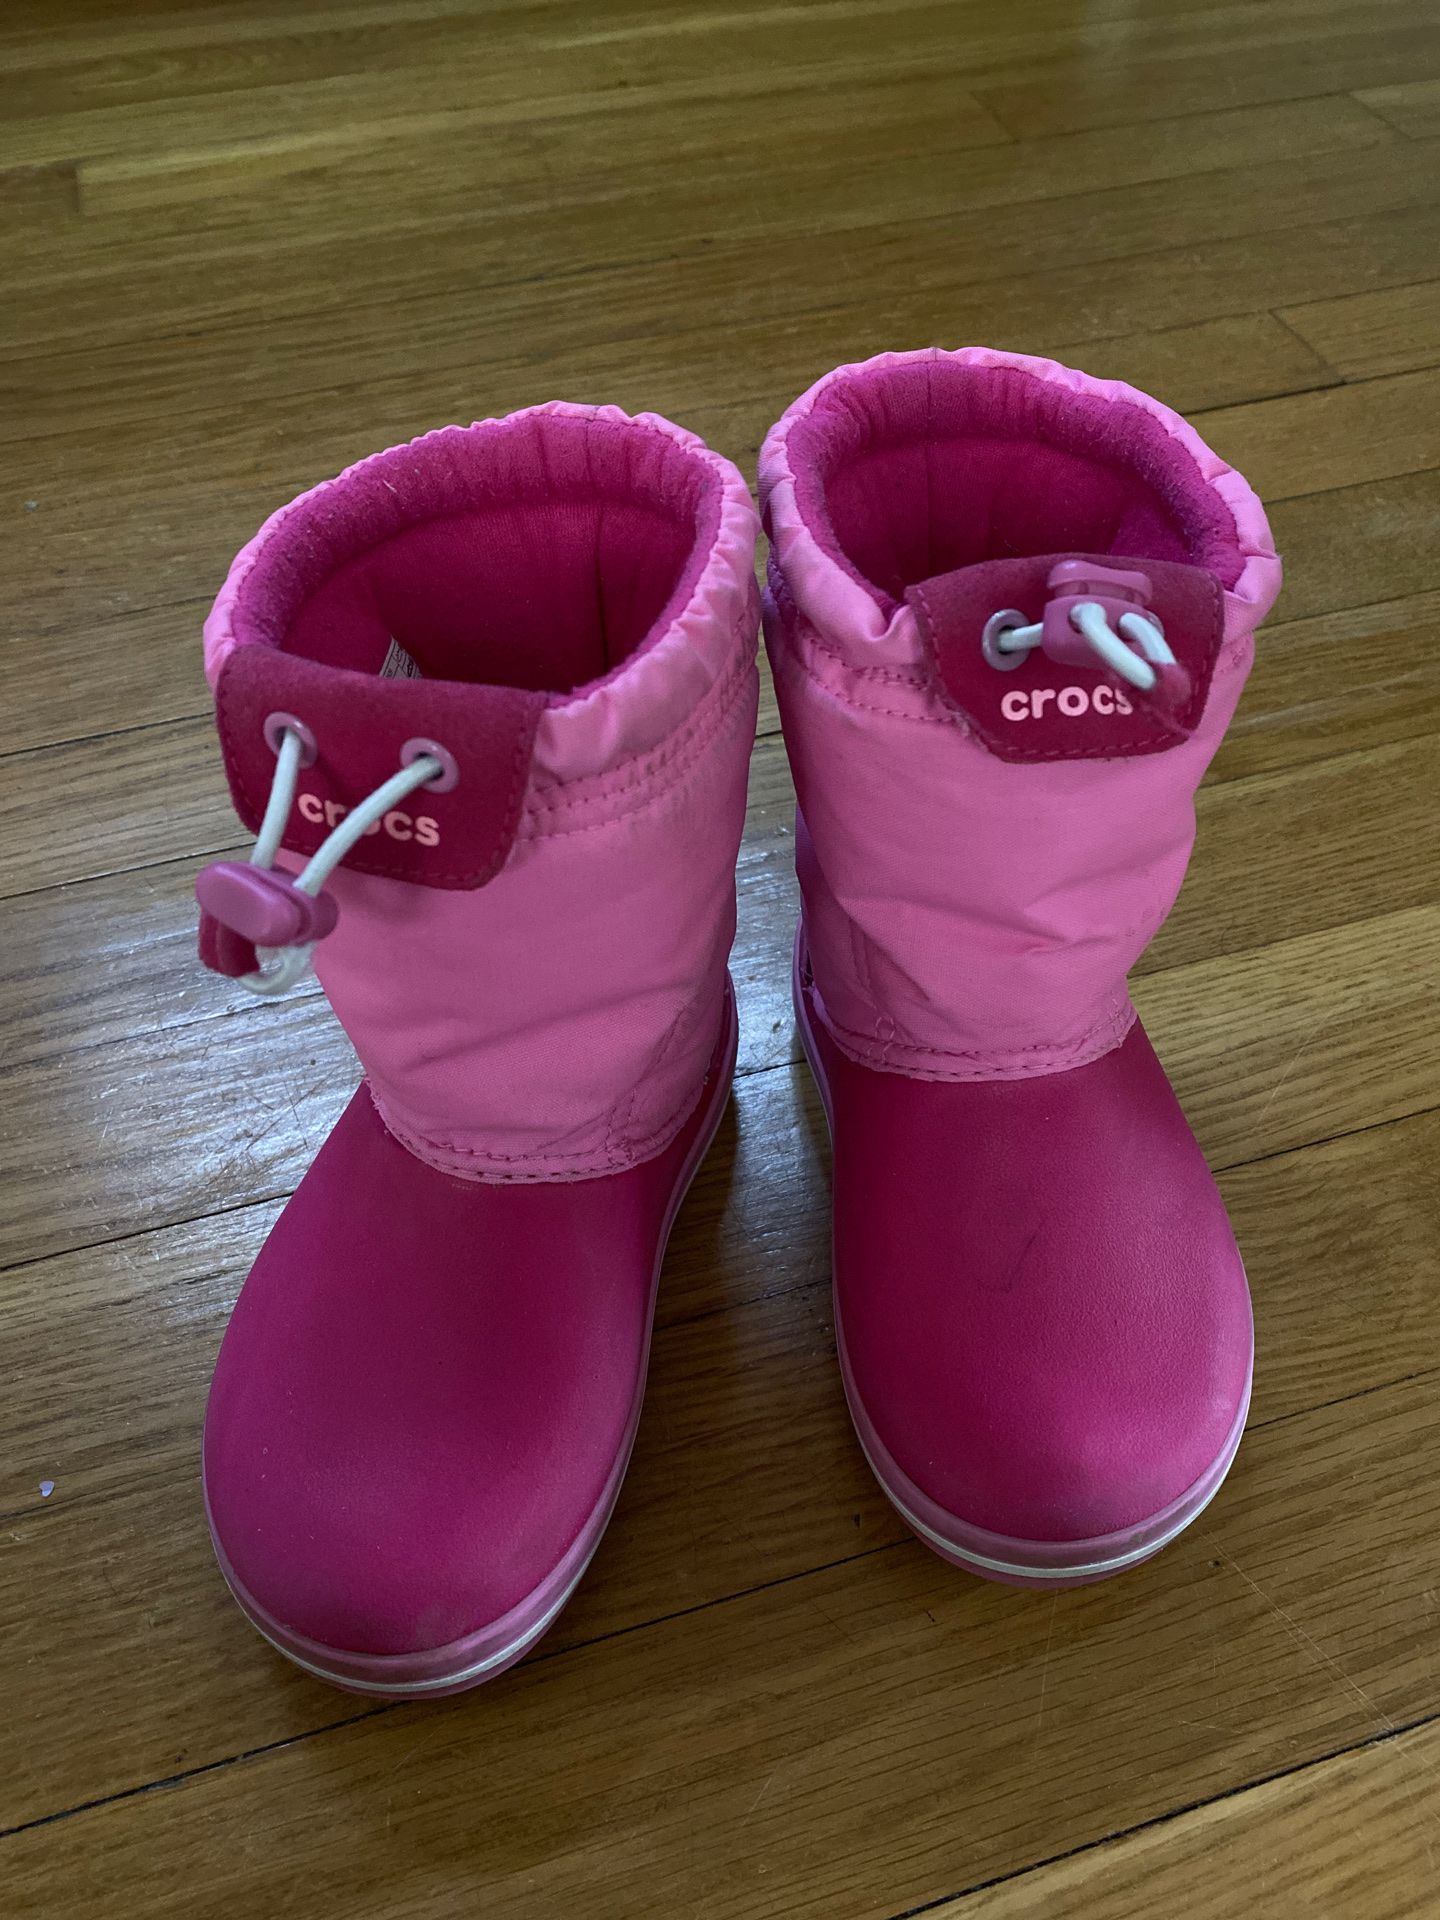 Pink Croc Boots - Size 9 Toddlers